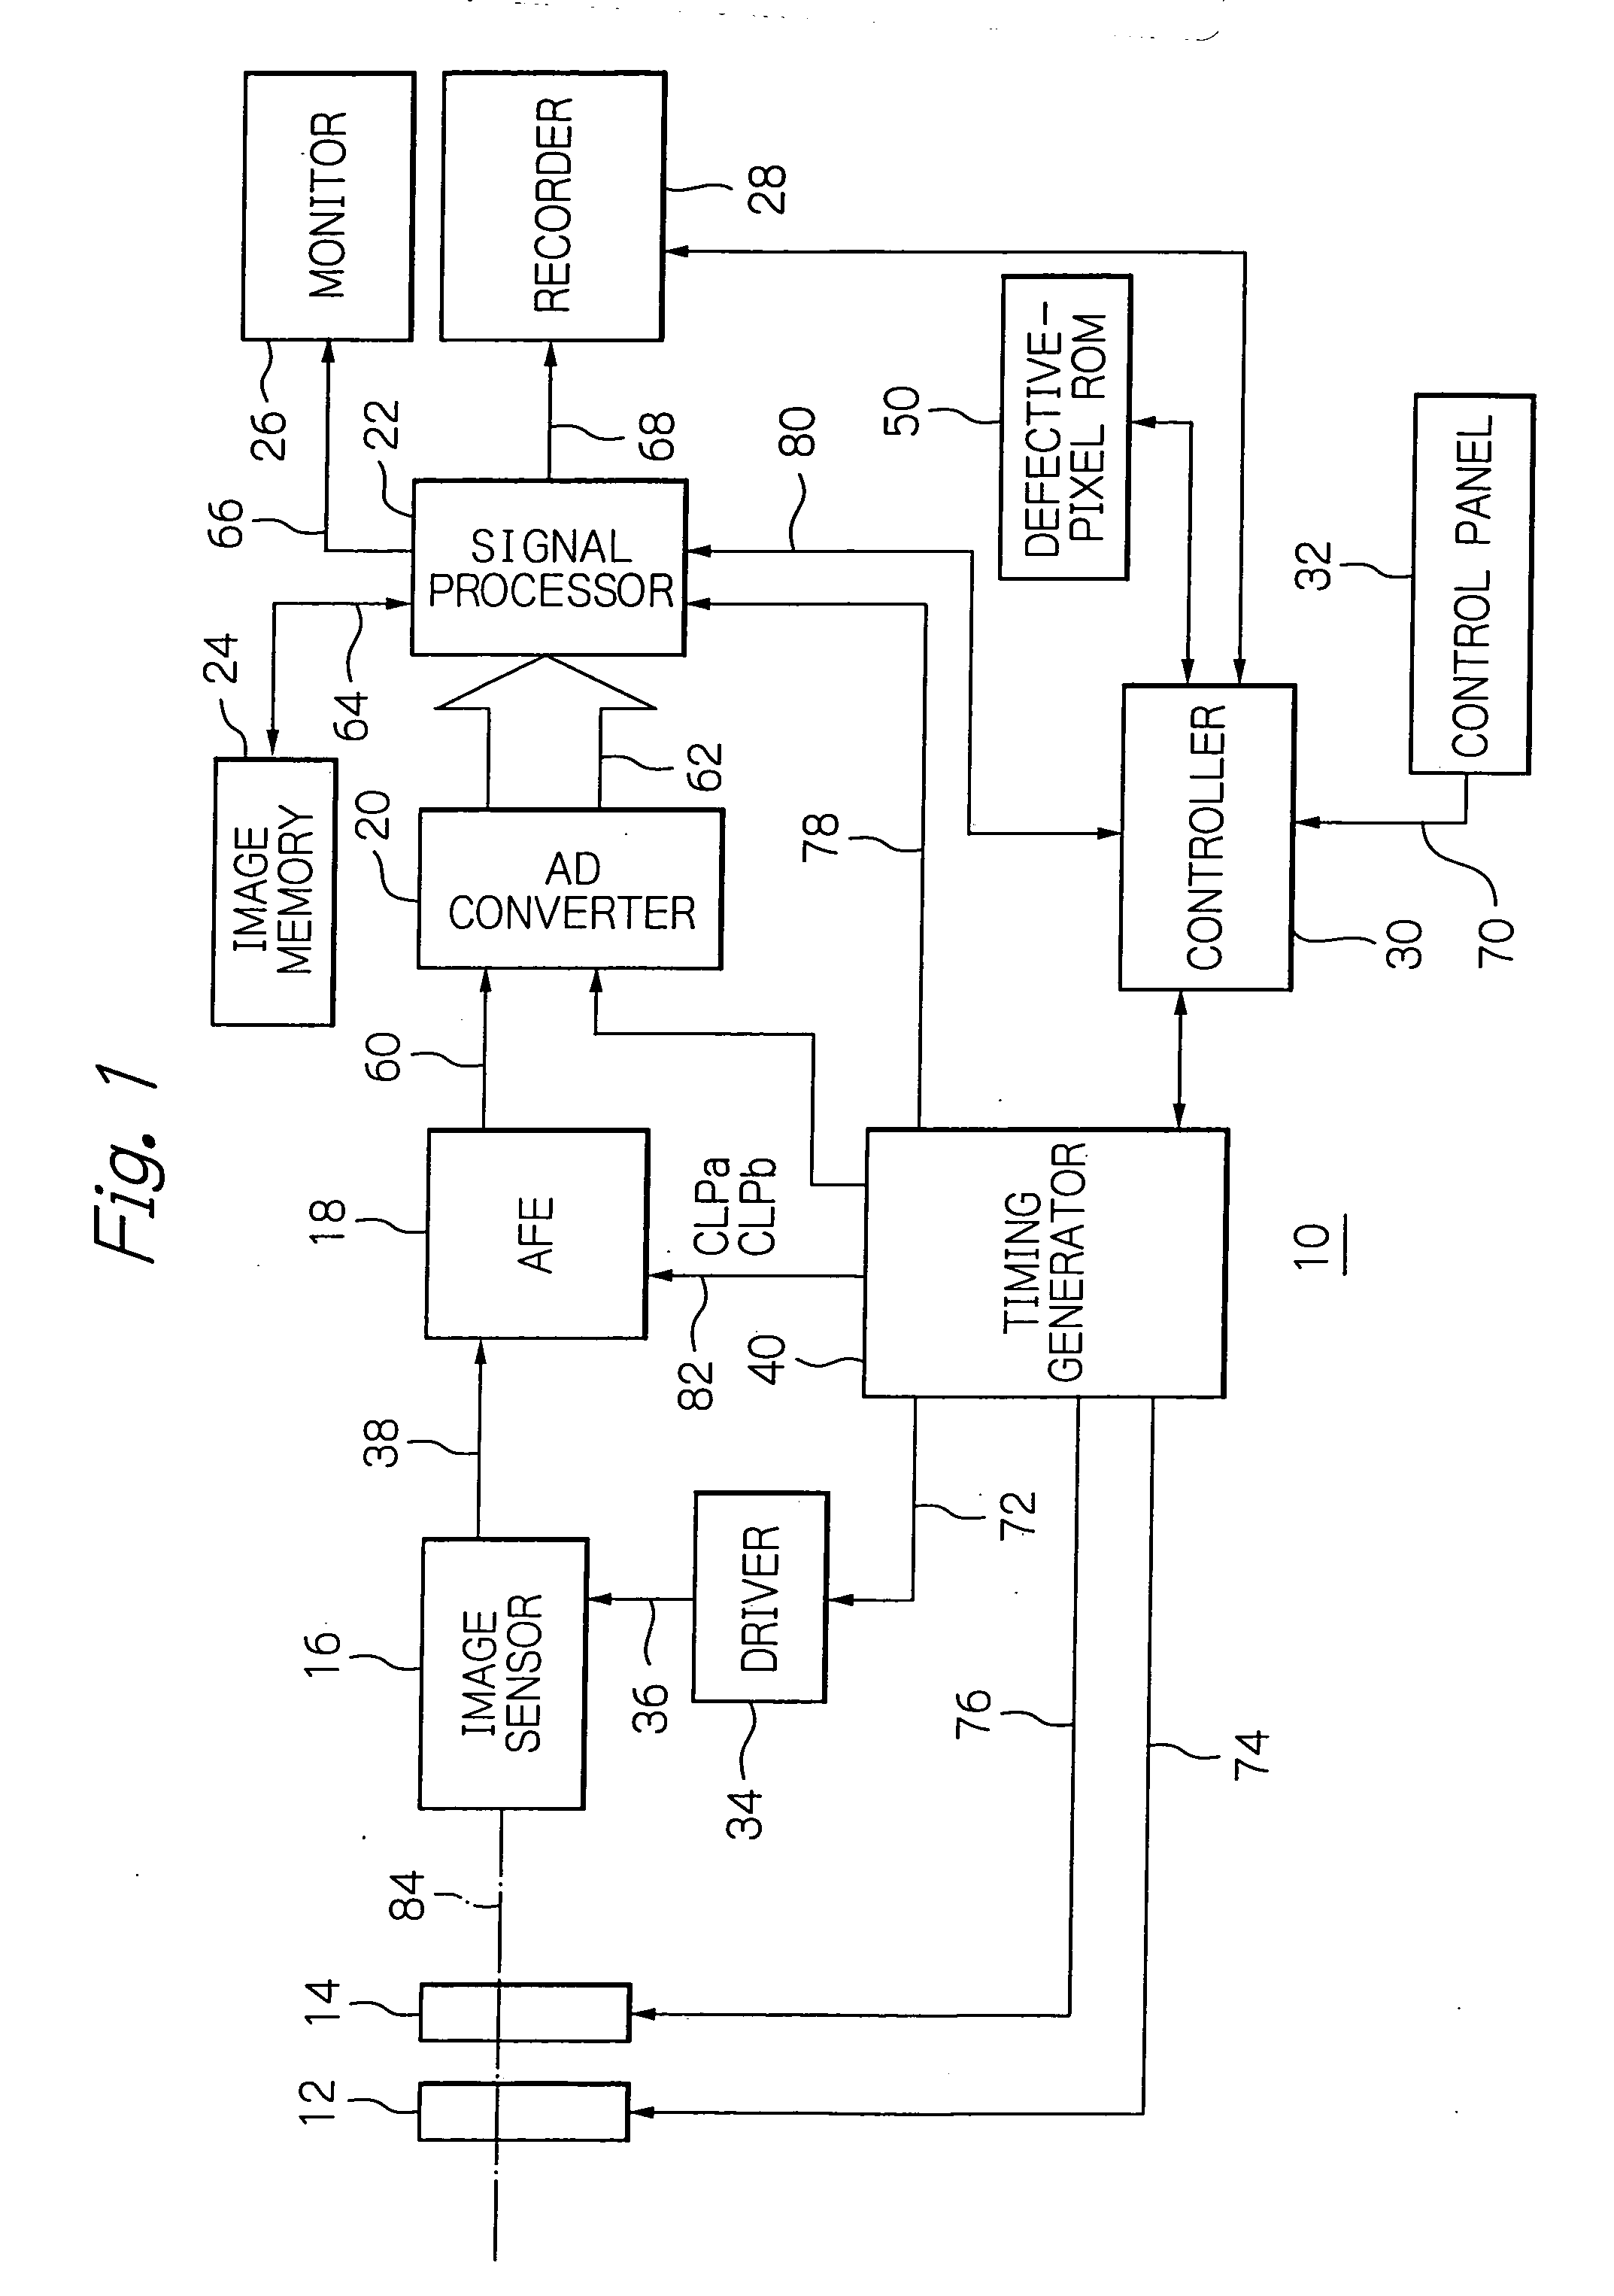 Solid-state image sensor with an optical black area having pixels for detecting black level